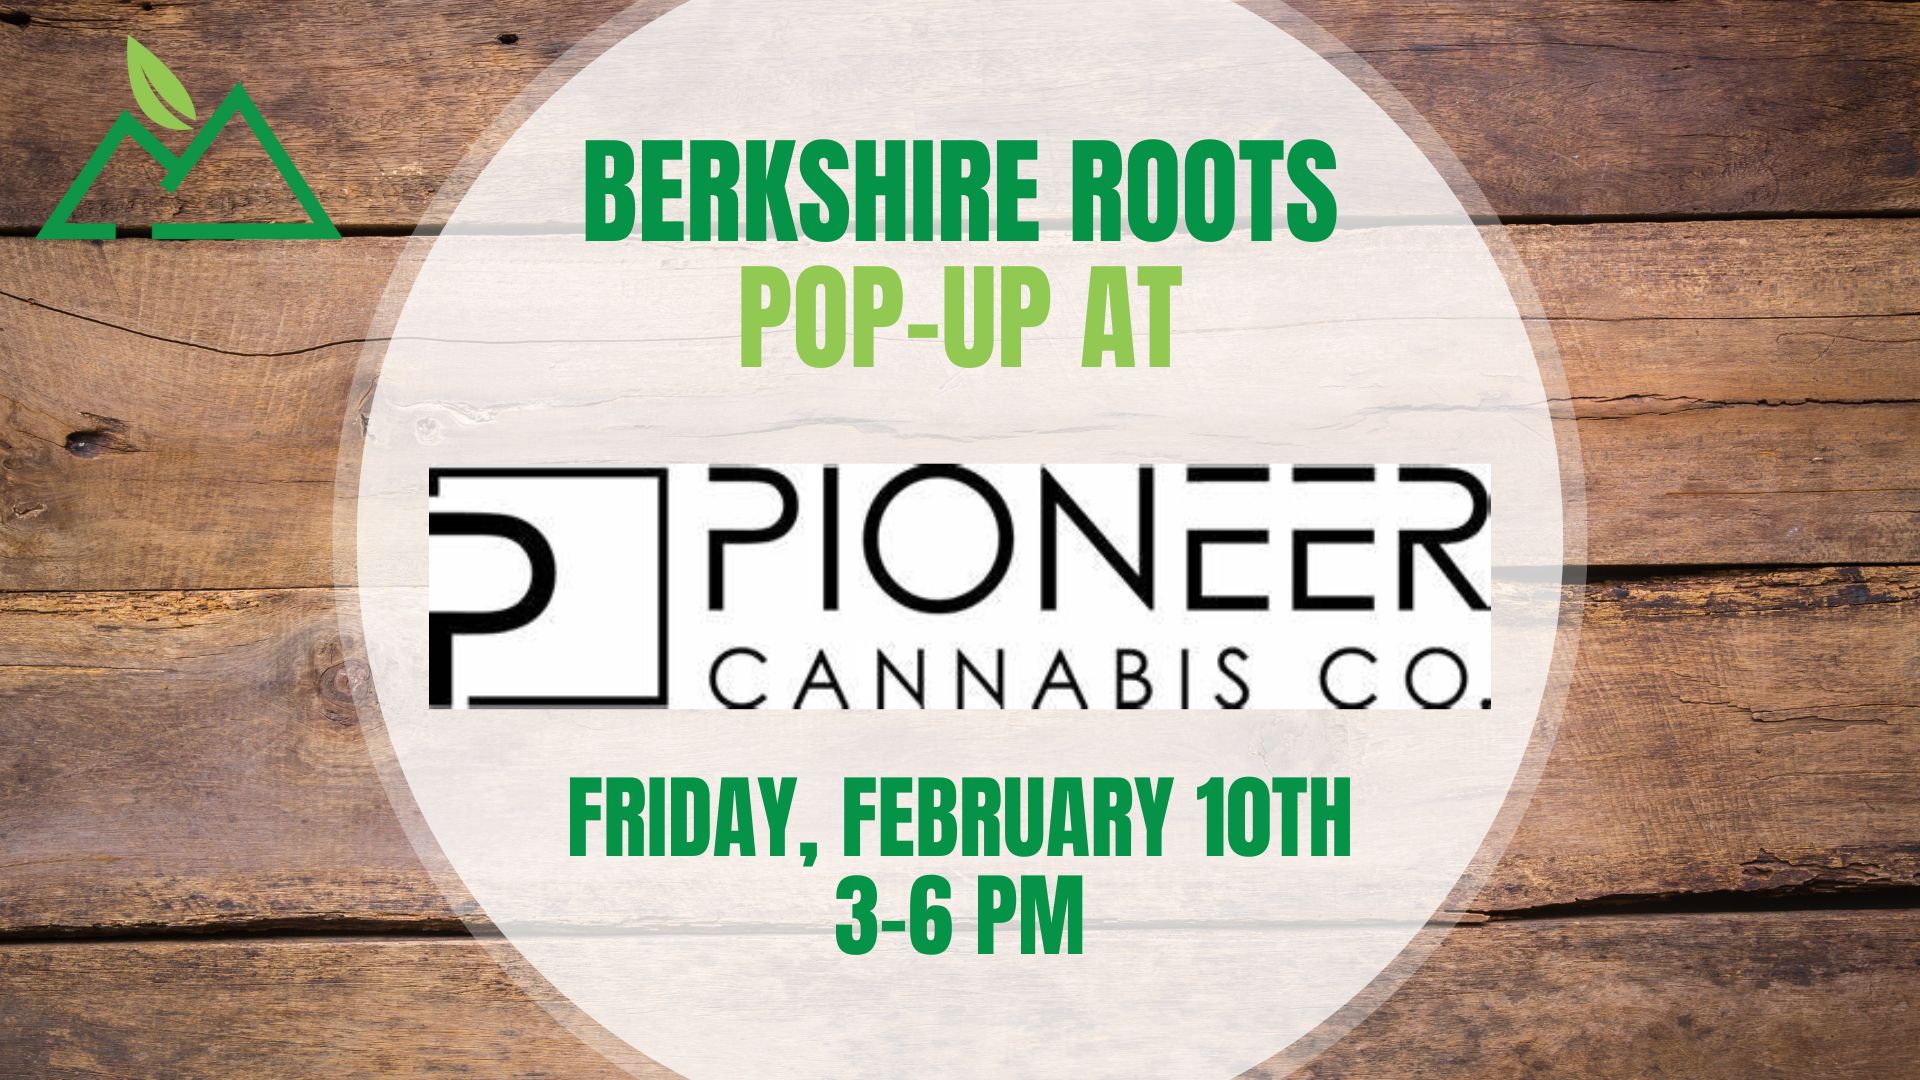 Berkshire Roots popup at Pioneer Cannabis Company